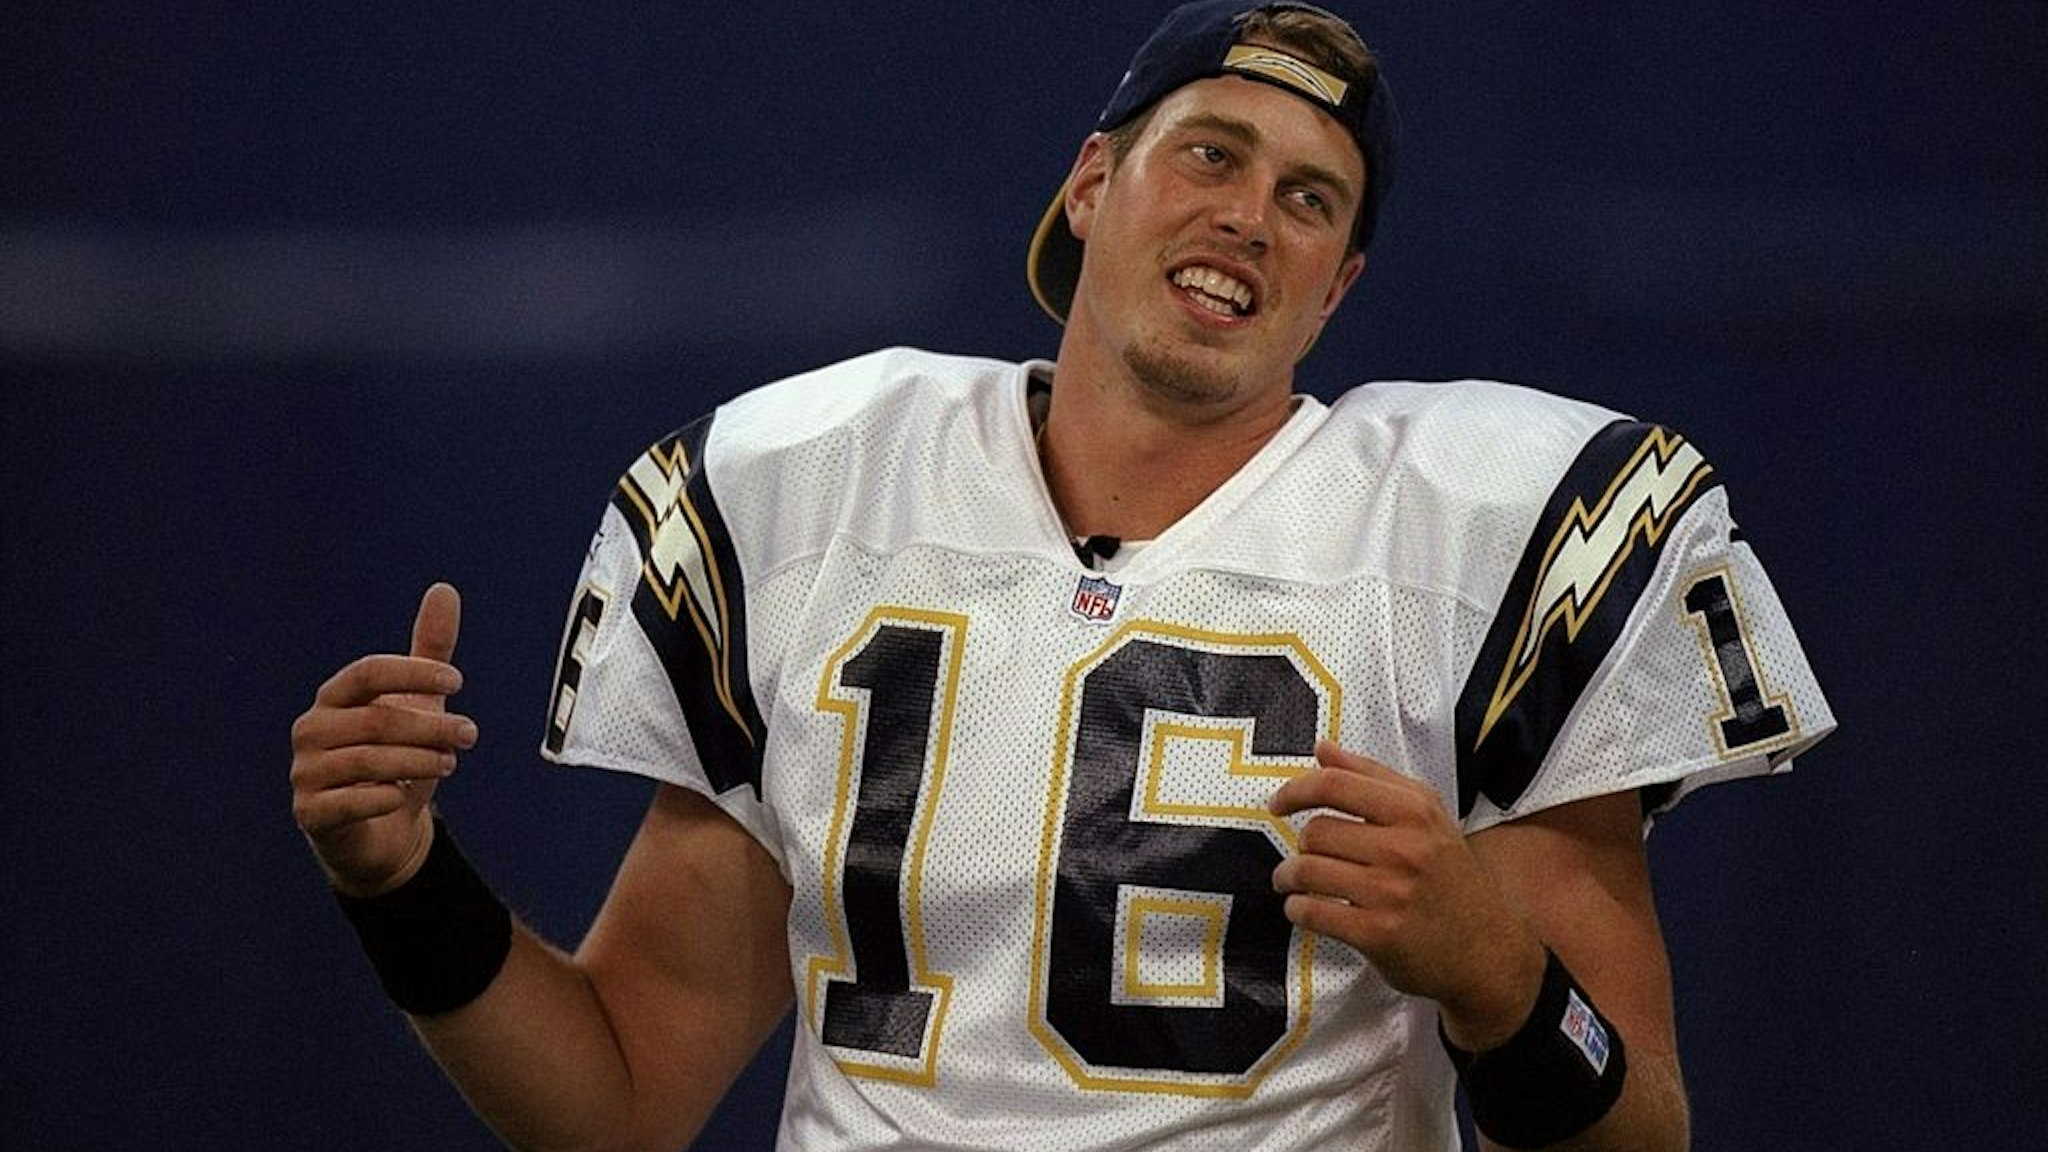 22 Aug 1998: Quarterback Ryan Leaf #16 of the San Diego Chargers standing around talking before the pre-season game against the Indianapolis Colts at the RCA Dome in Indianapolis, Indiana. The Chargers defeated the Colts 33-3.